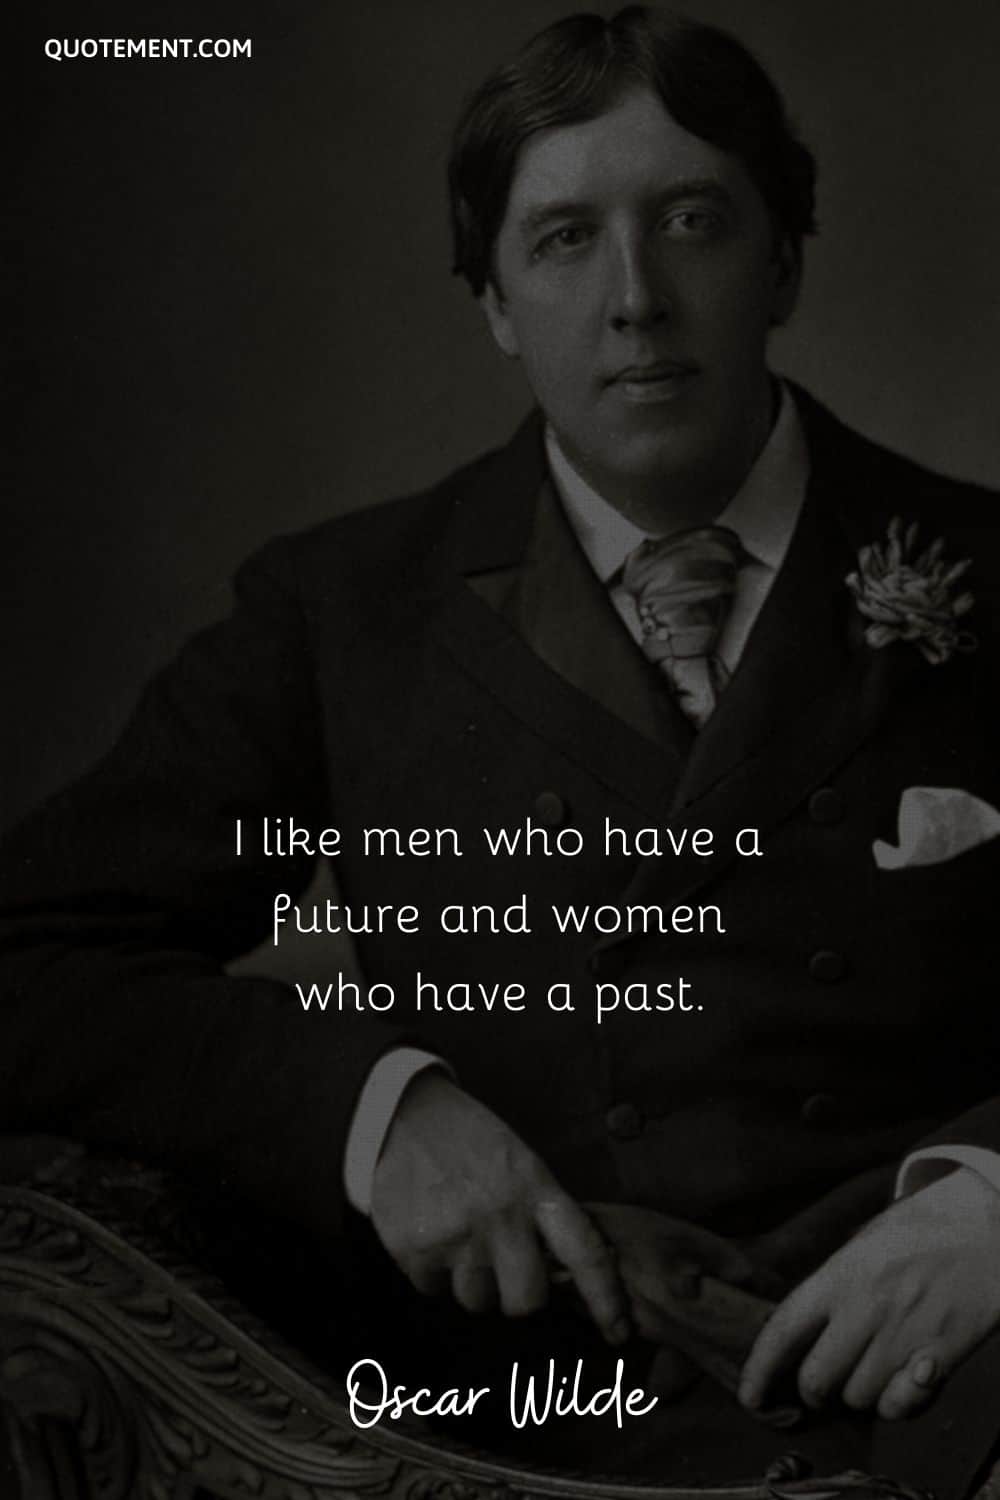 I like men who have a future and women who have a past